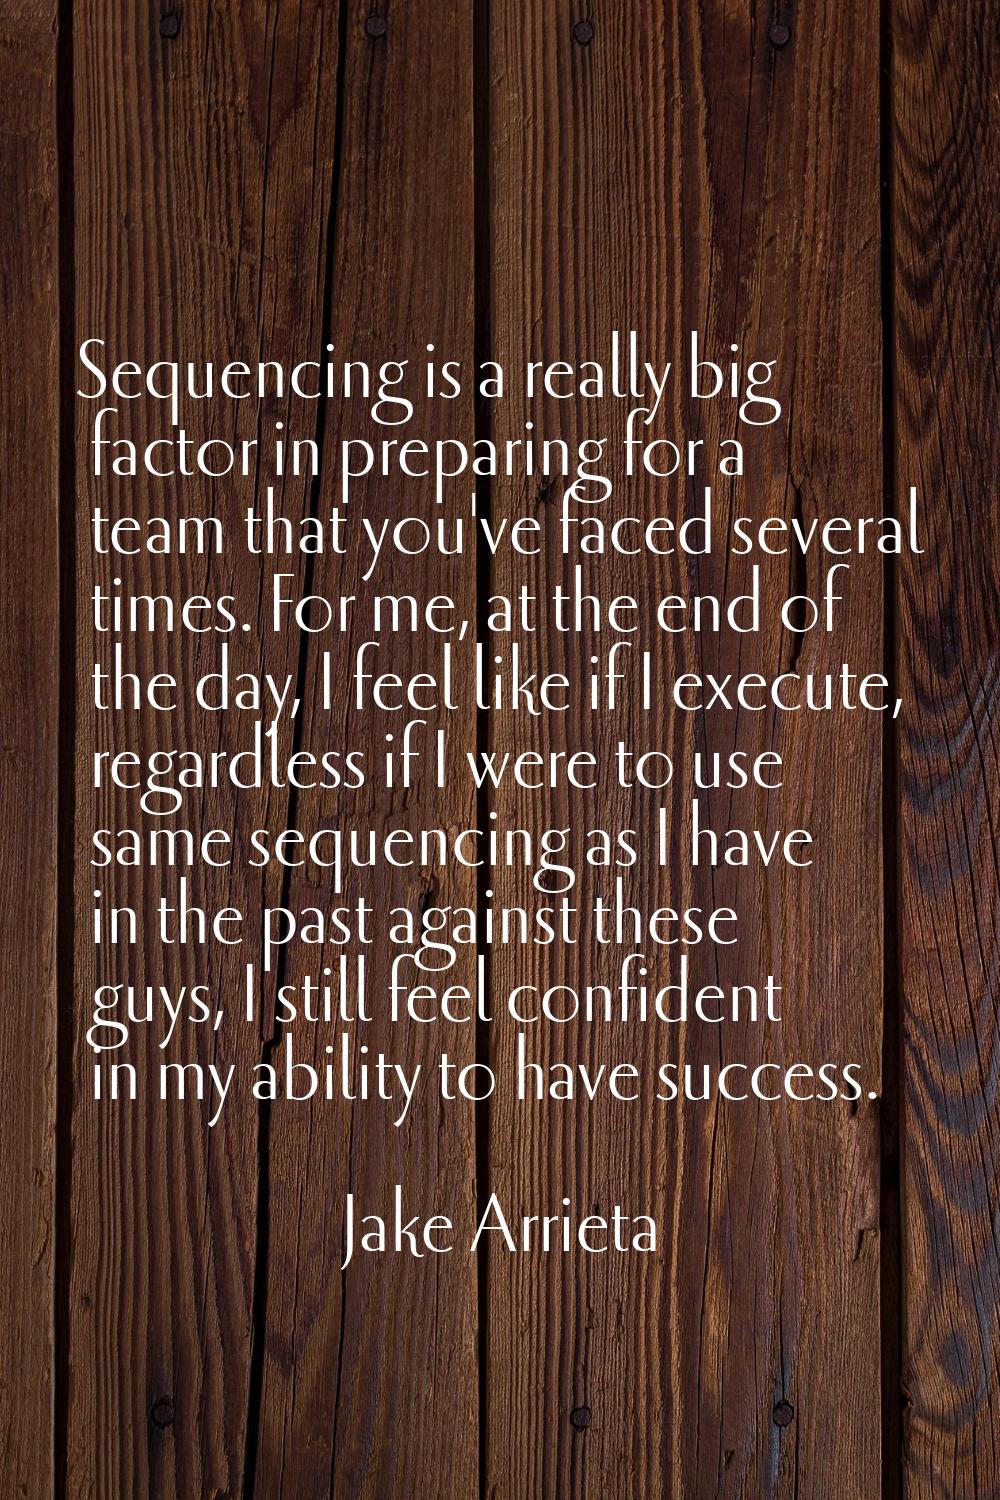 Sequencing is a really big factor in preparing for a team that you've faced several times. For me, 